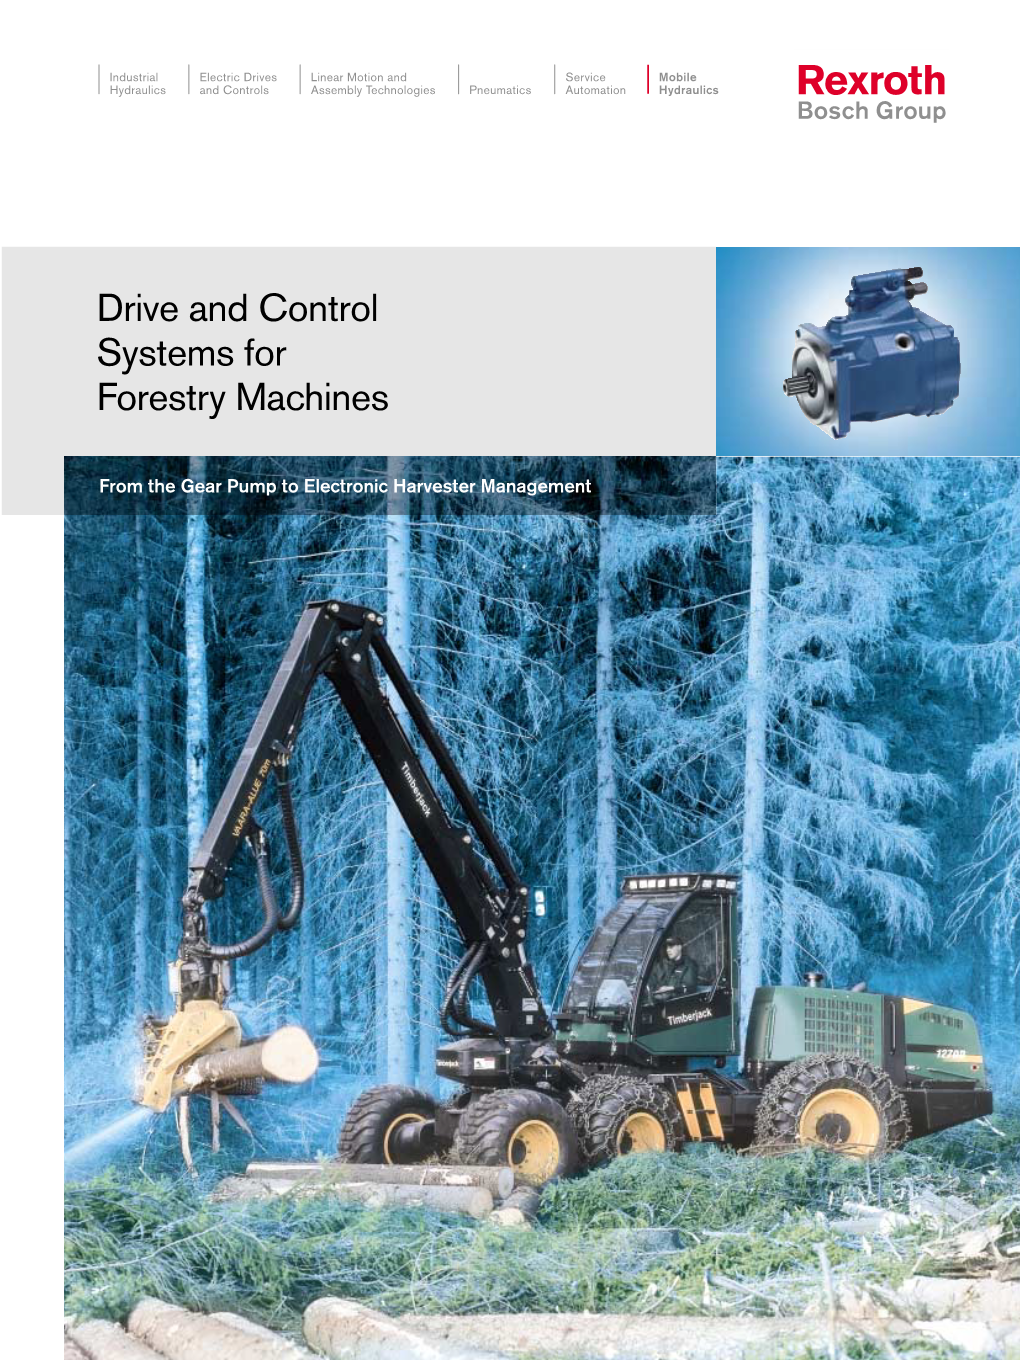 Drive and Control Systems for Forestry Machines